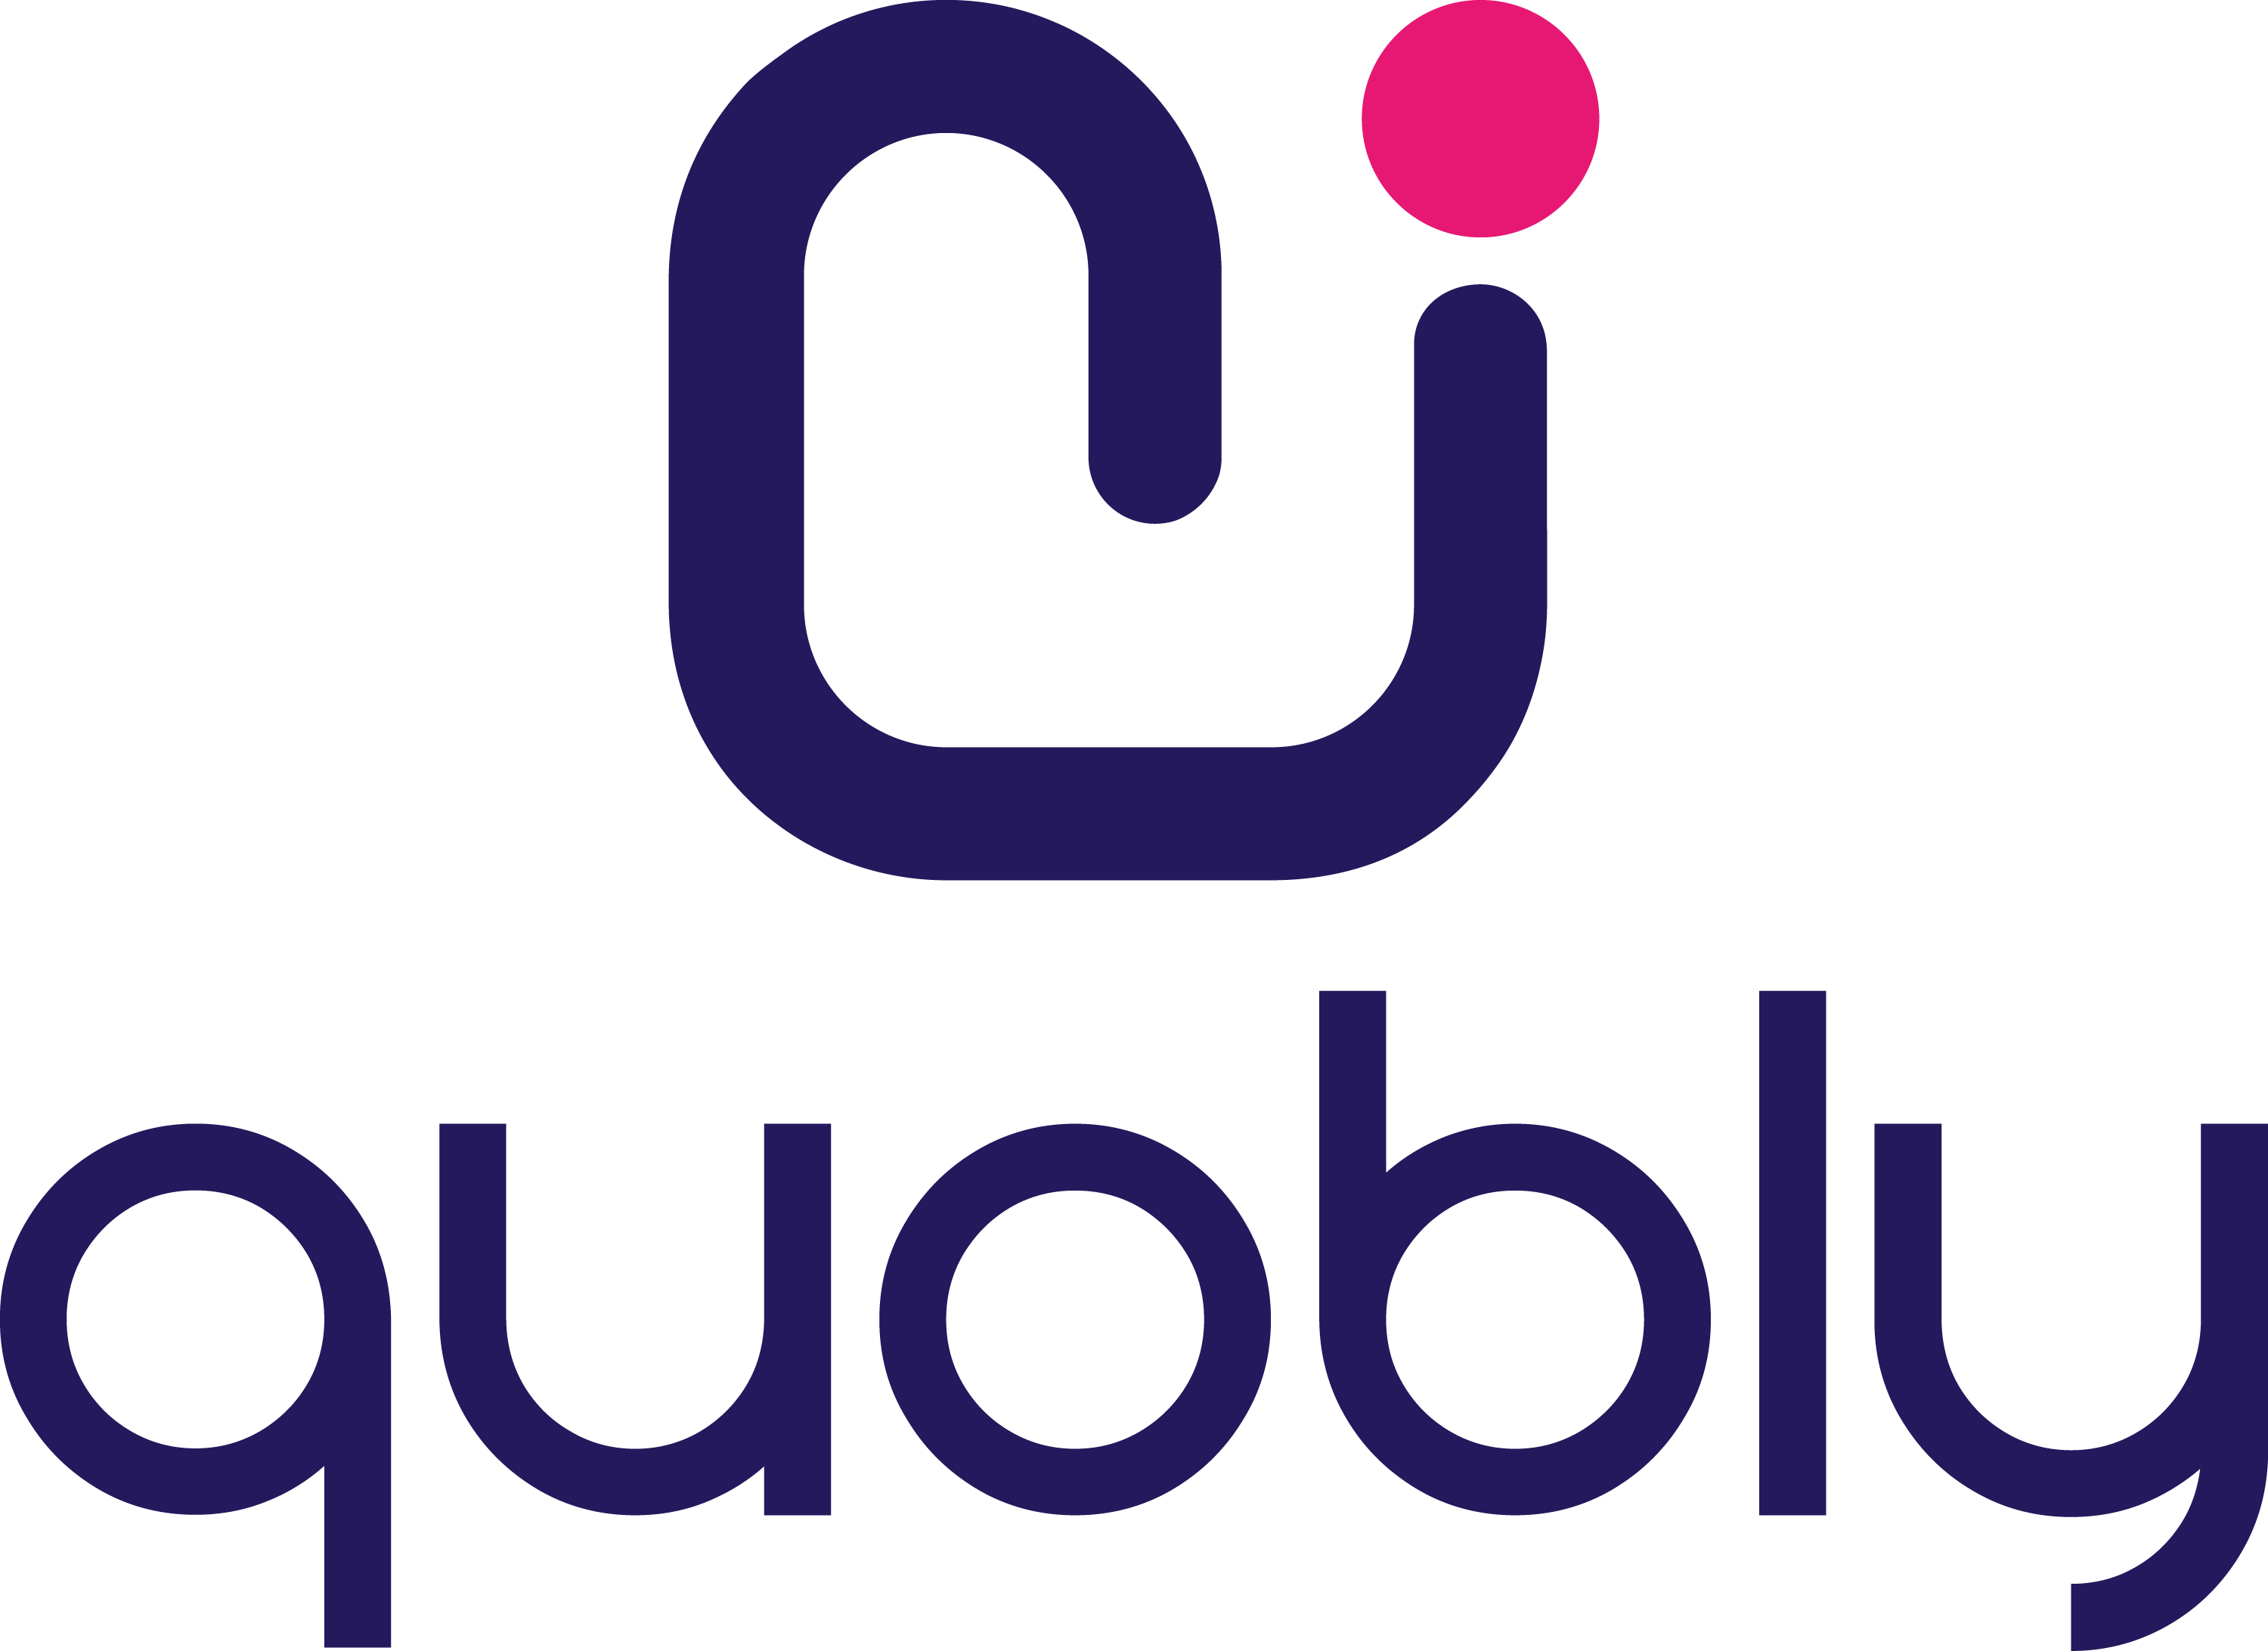 Quobly